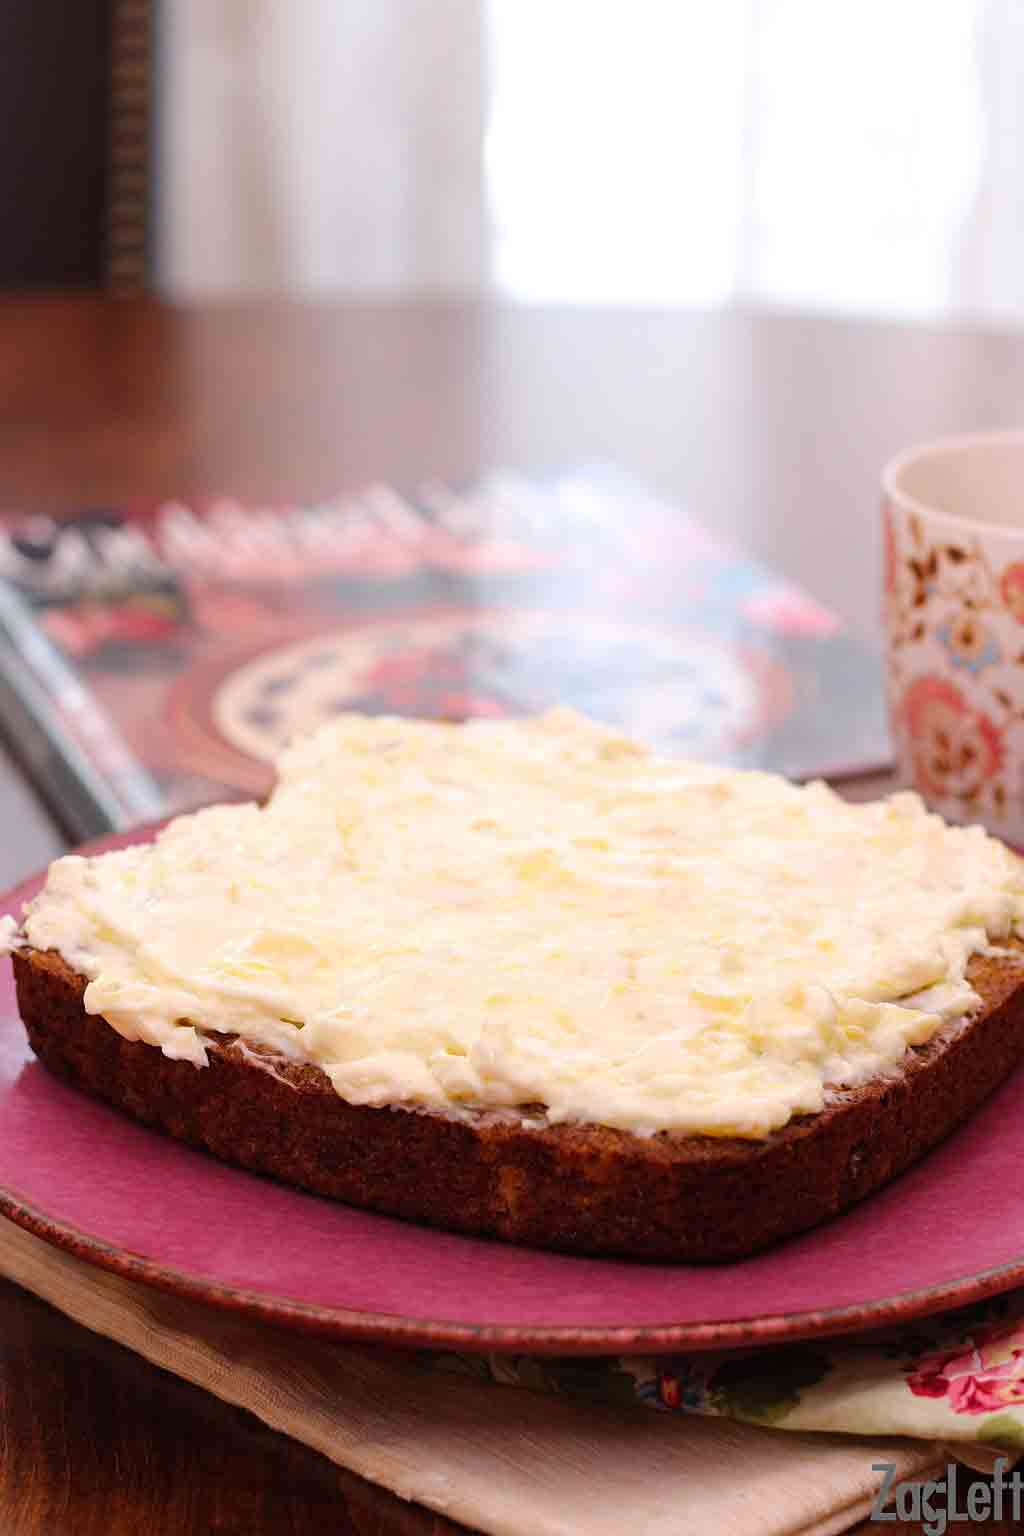 A closeup of a square cake frosted on a wooden table next to a cookbook and a coffee mug